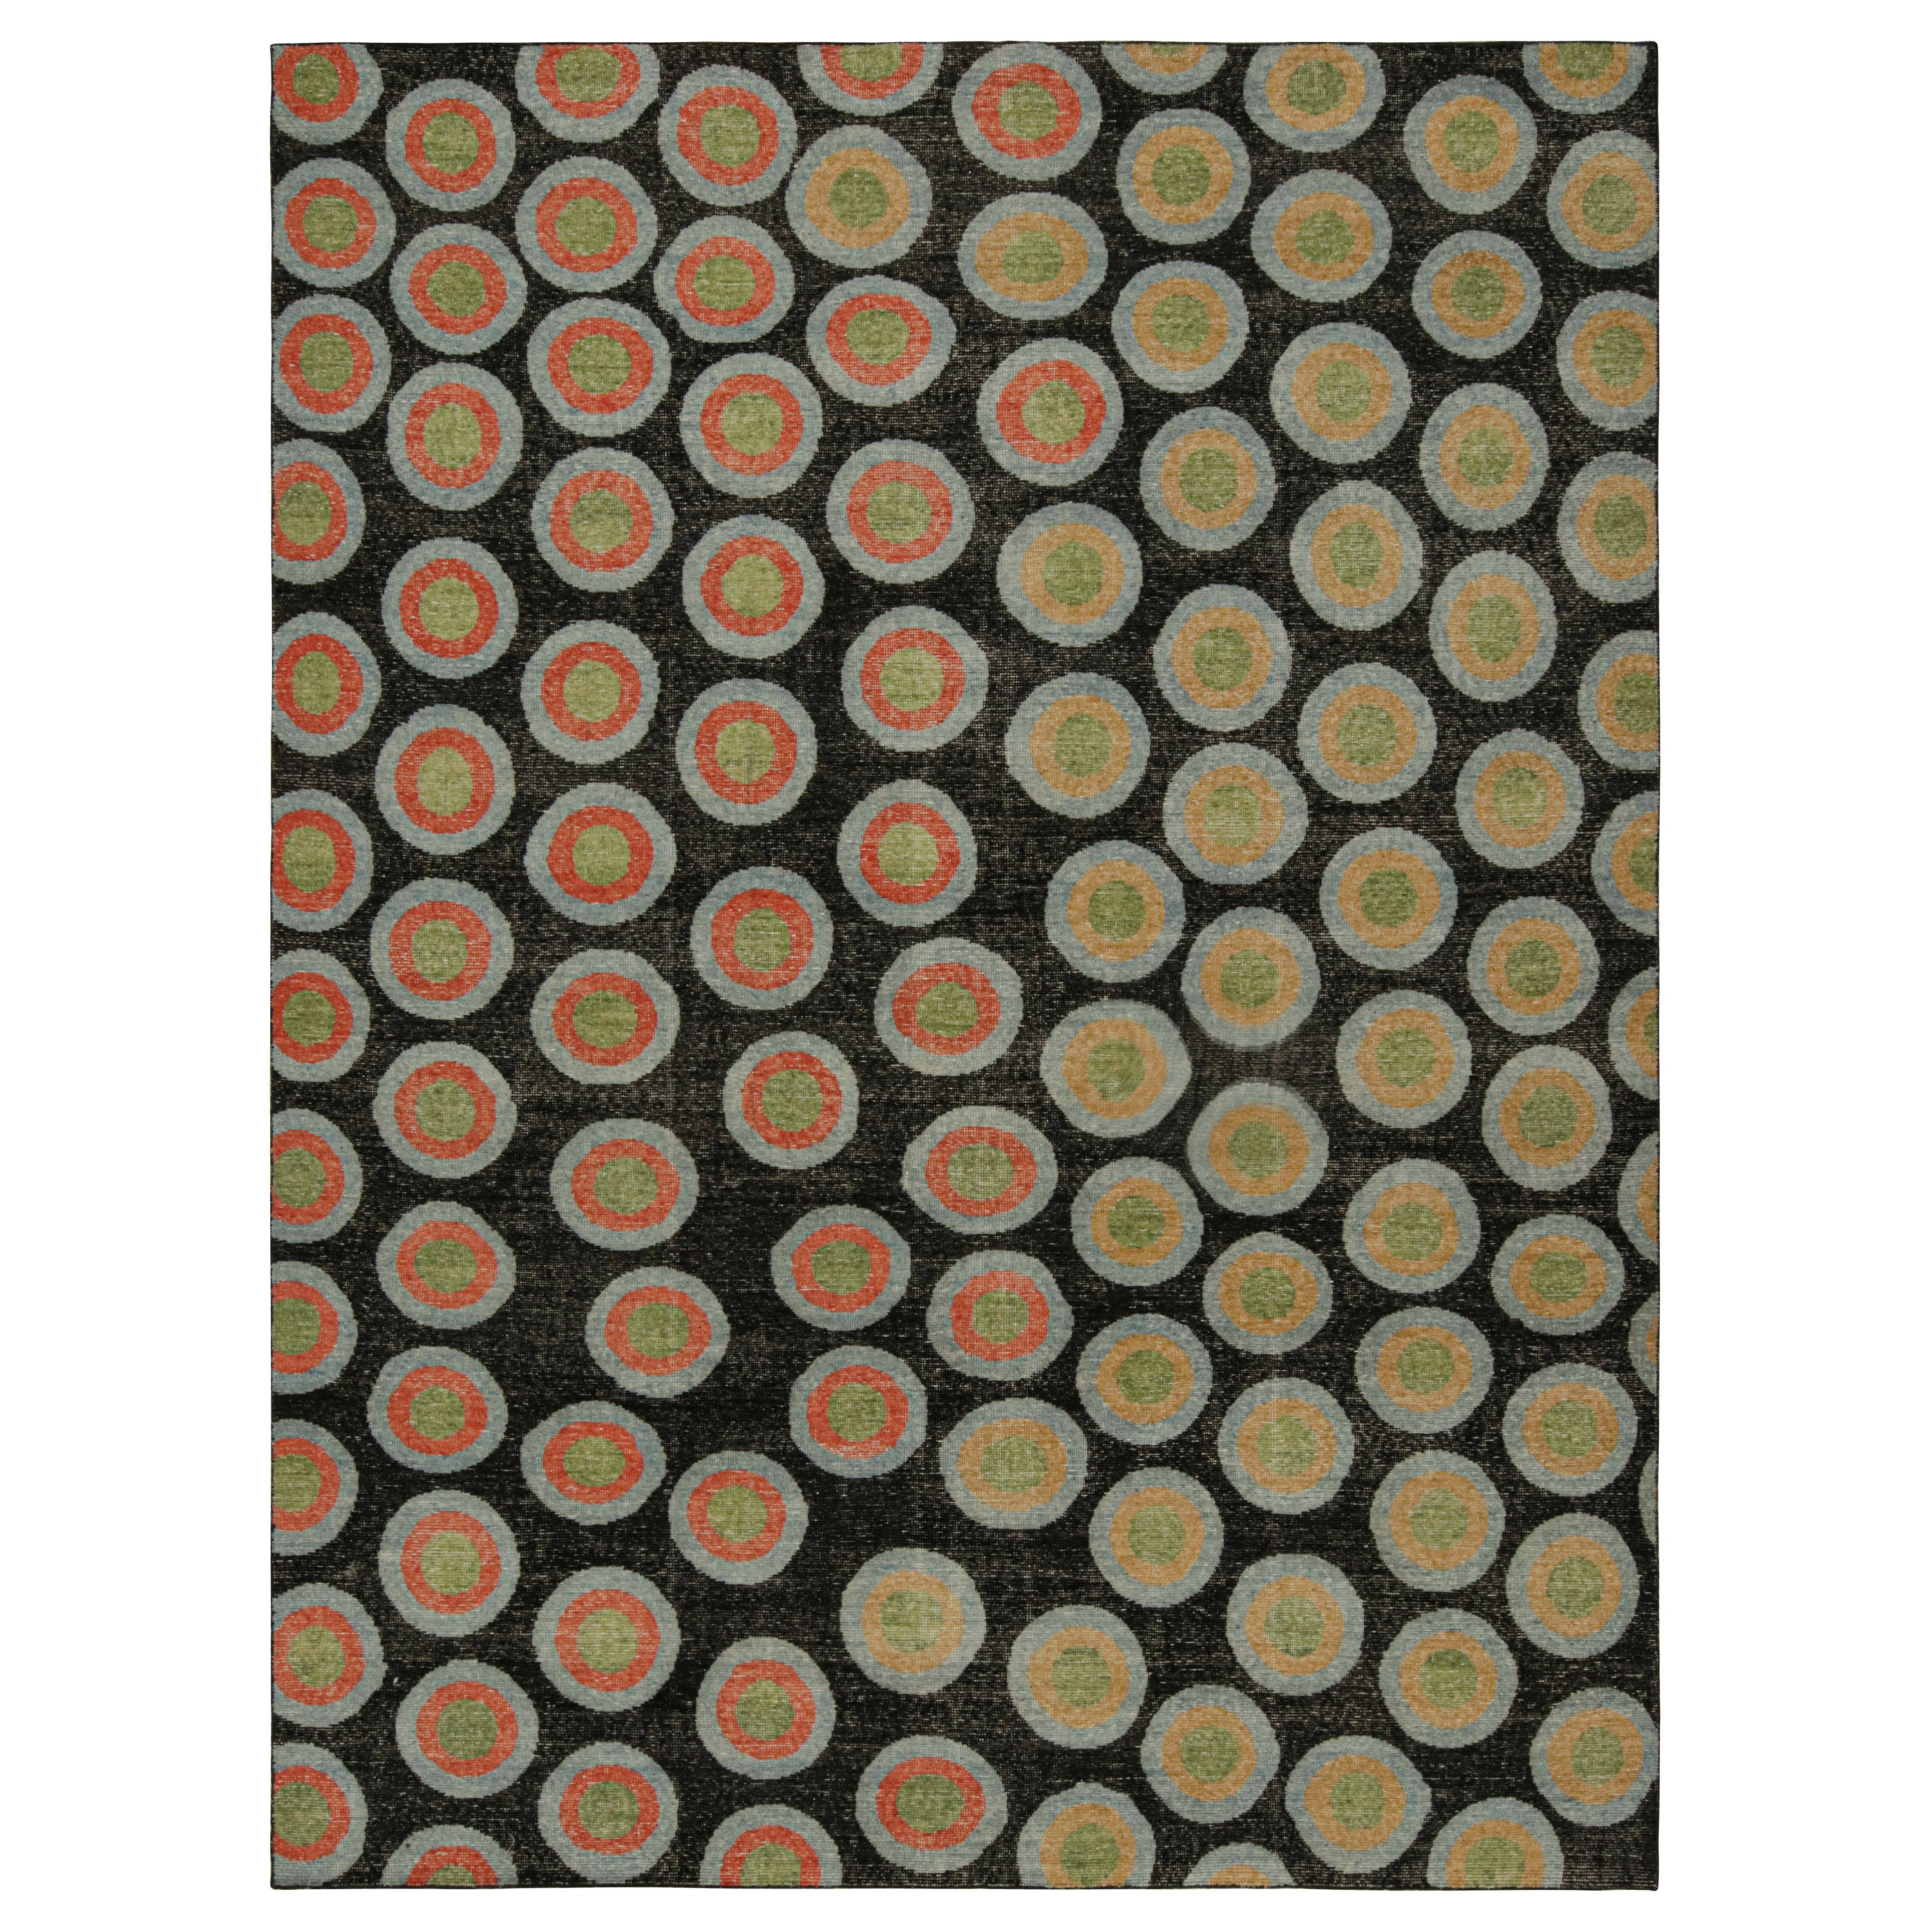 Rug & Kilim’s Modern Deco Rug, with Geometric Patterns in Green, Orange and Blue For Sale